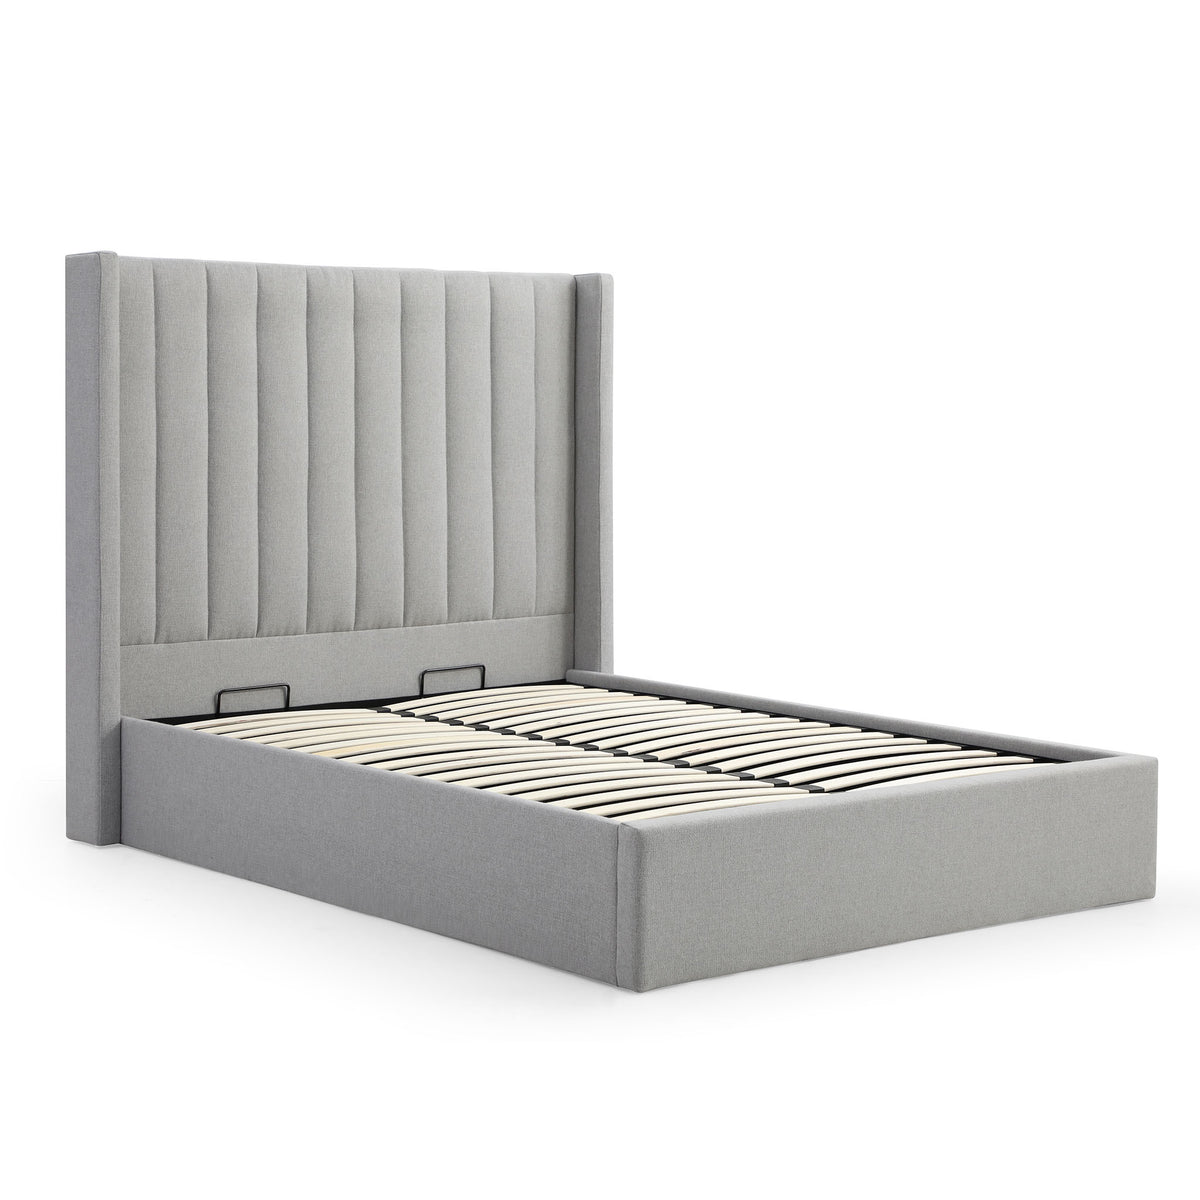 Maude Grey Faux Wool Ottoman Storage Bed Frame from Roseland Furniture